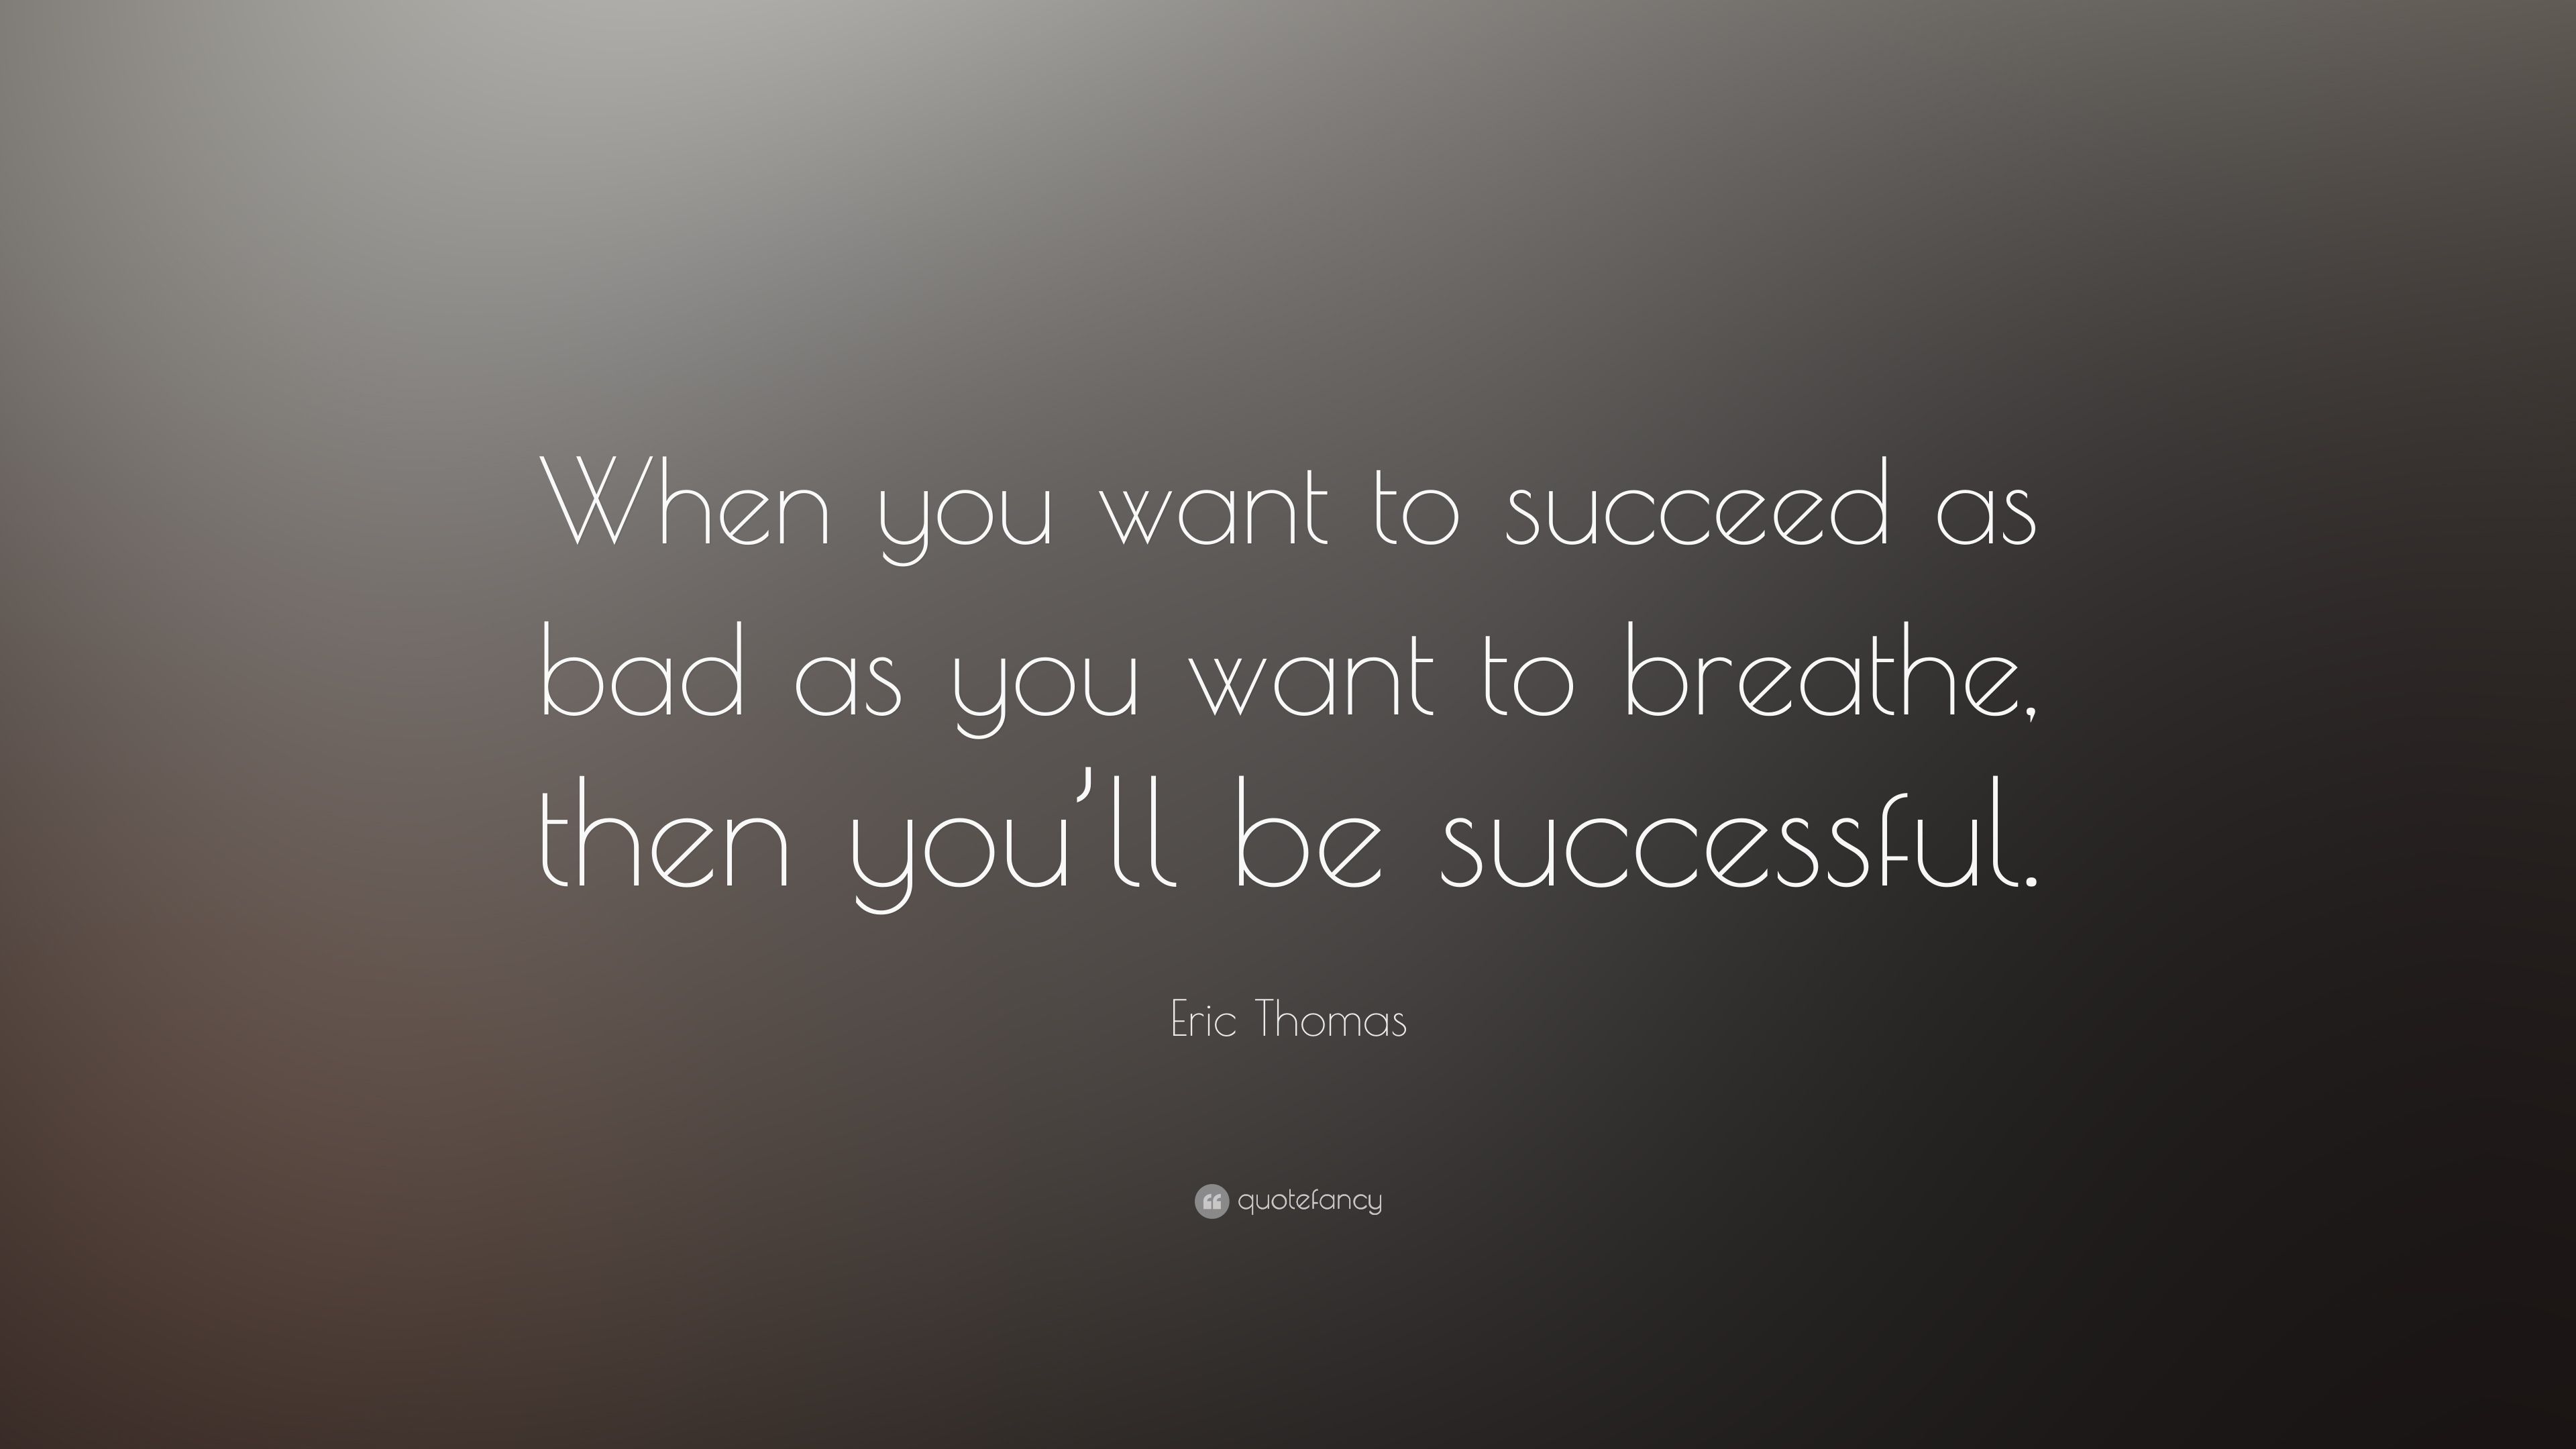 Eric Thomas Quote: “When you want to succeed as bad as you want to breathe, then you'll be successful.” (29 wallpaper)